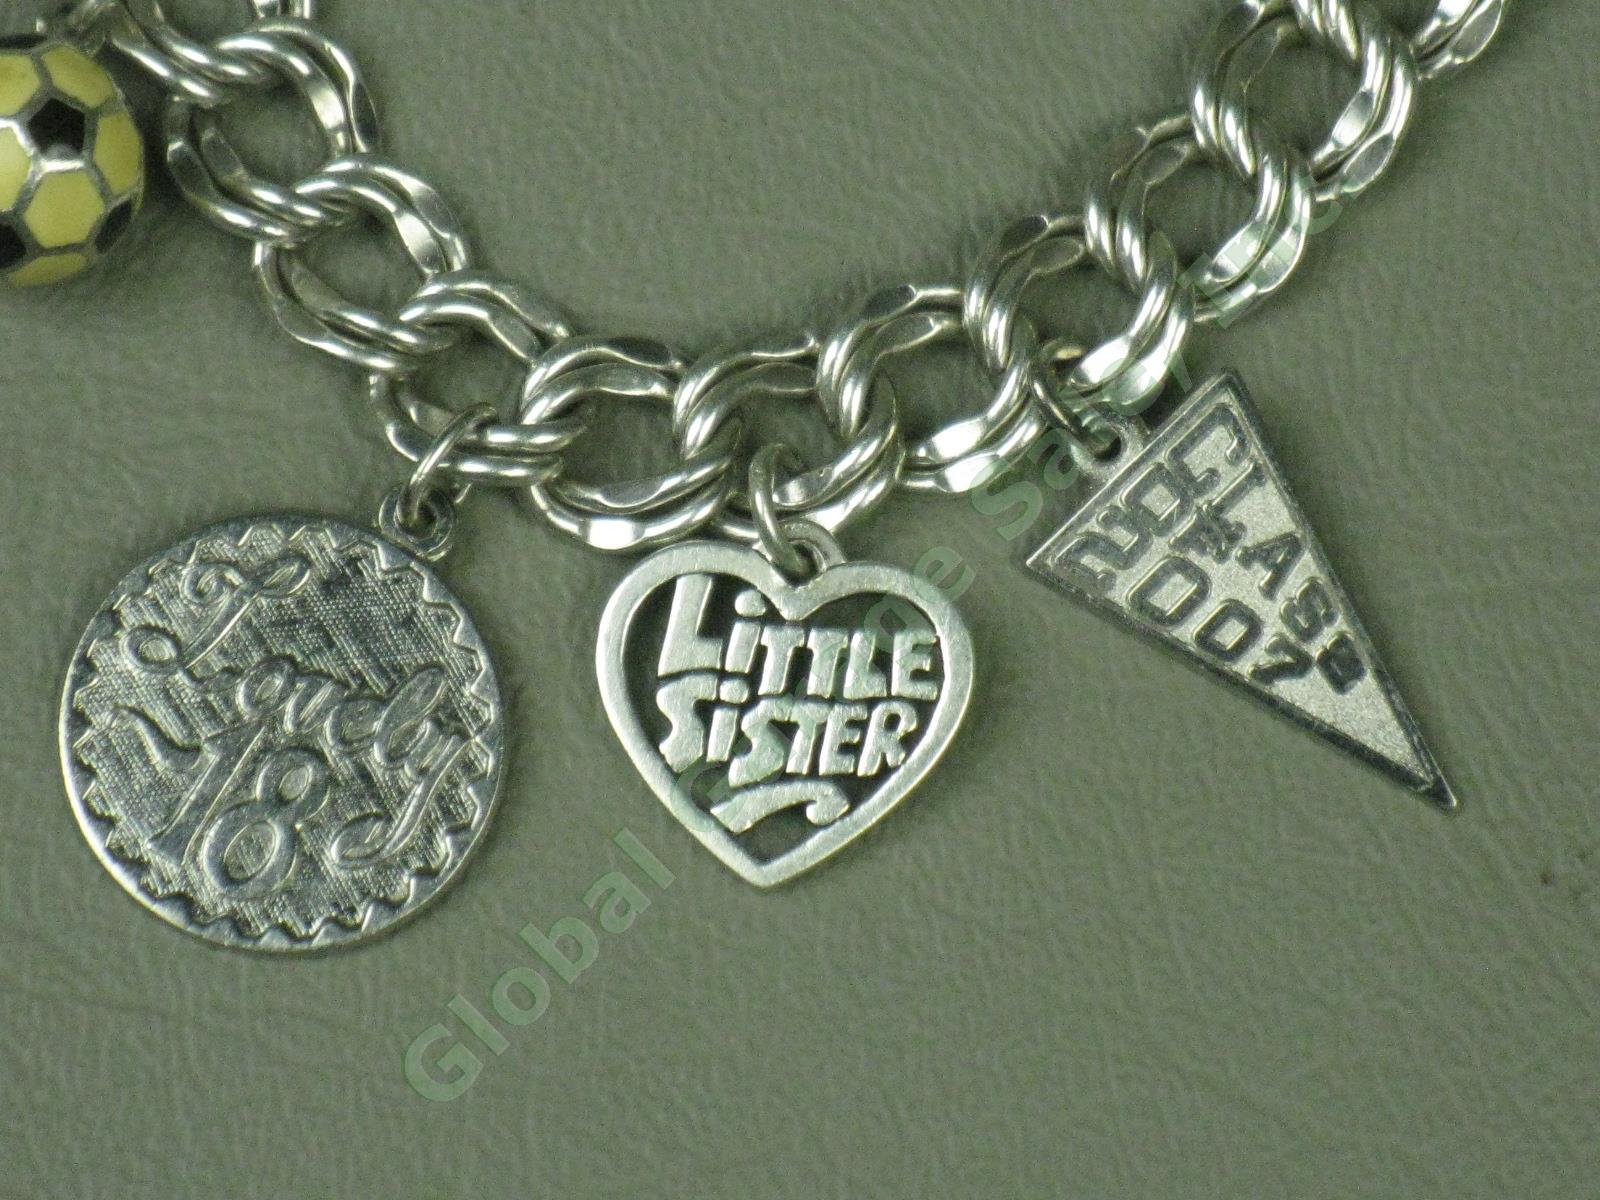 James Avery 7" Inch Light Double Curb Sterling Silver Charm Bracelet 5 Charms NR 1